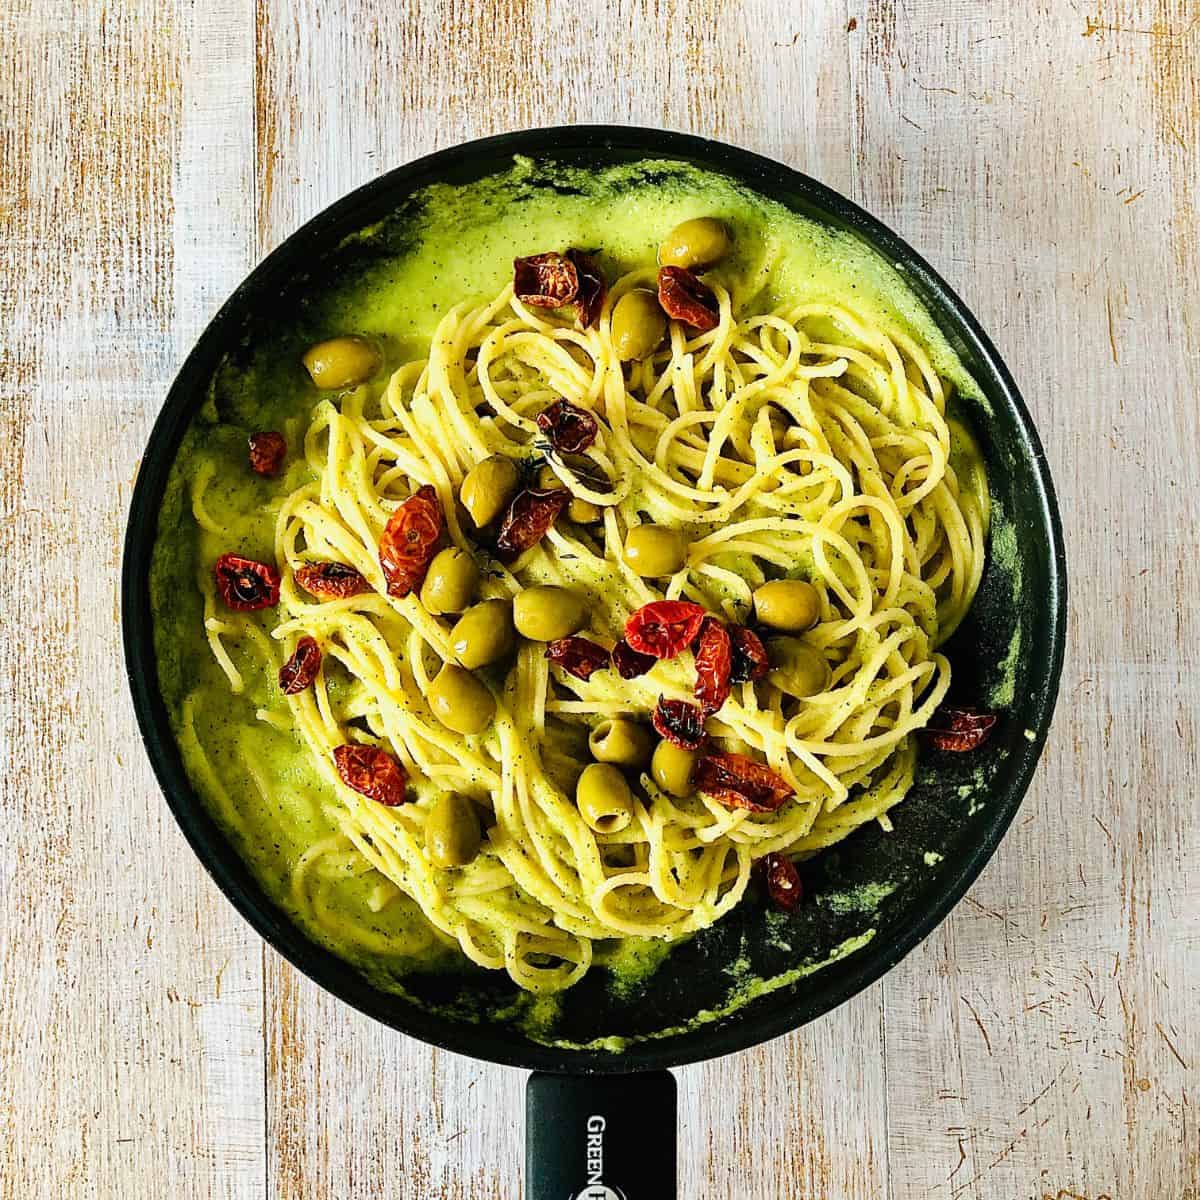 A frying pan containing spaghetti pasta in a courgette sauce with dried cherry tomatoes and olives.